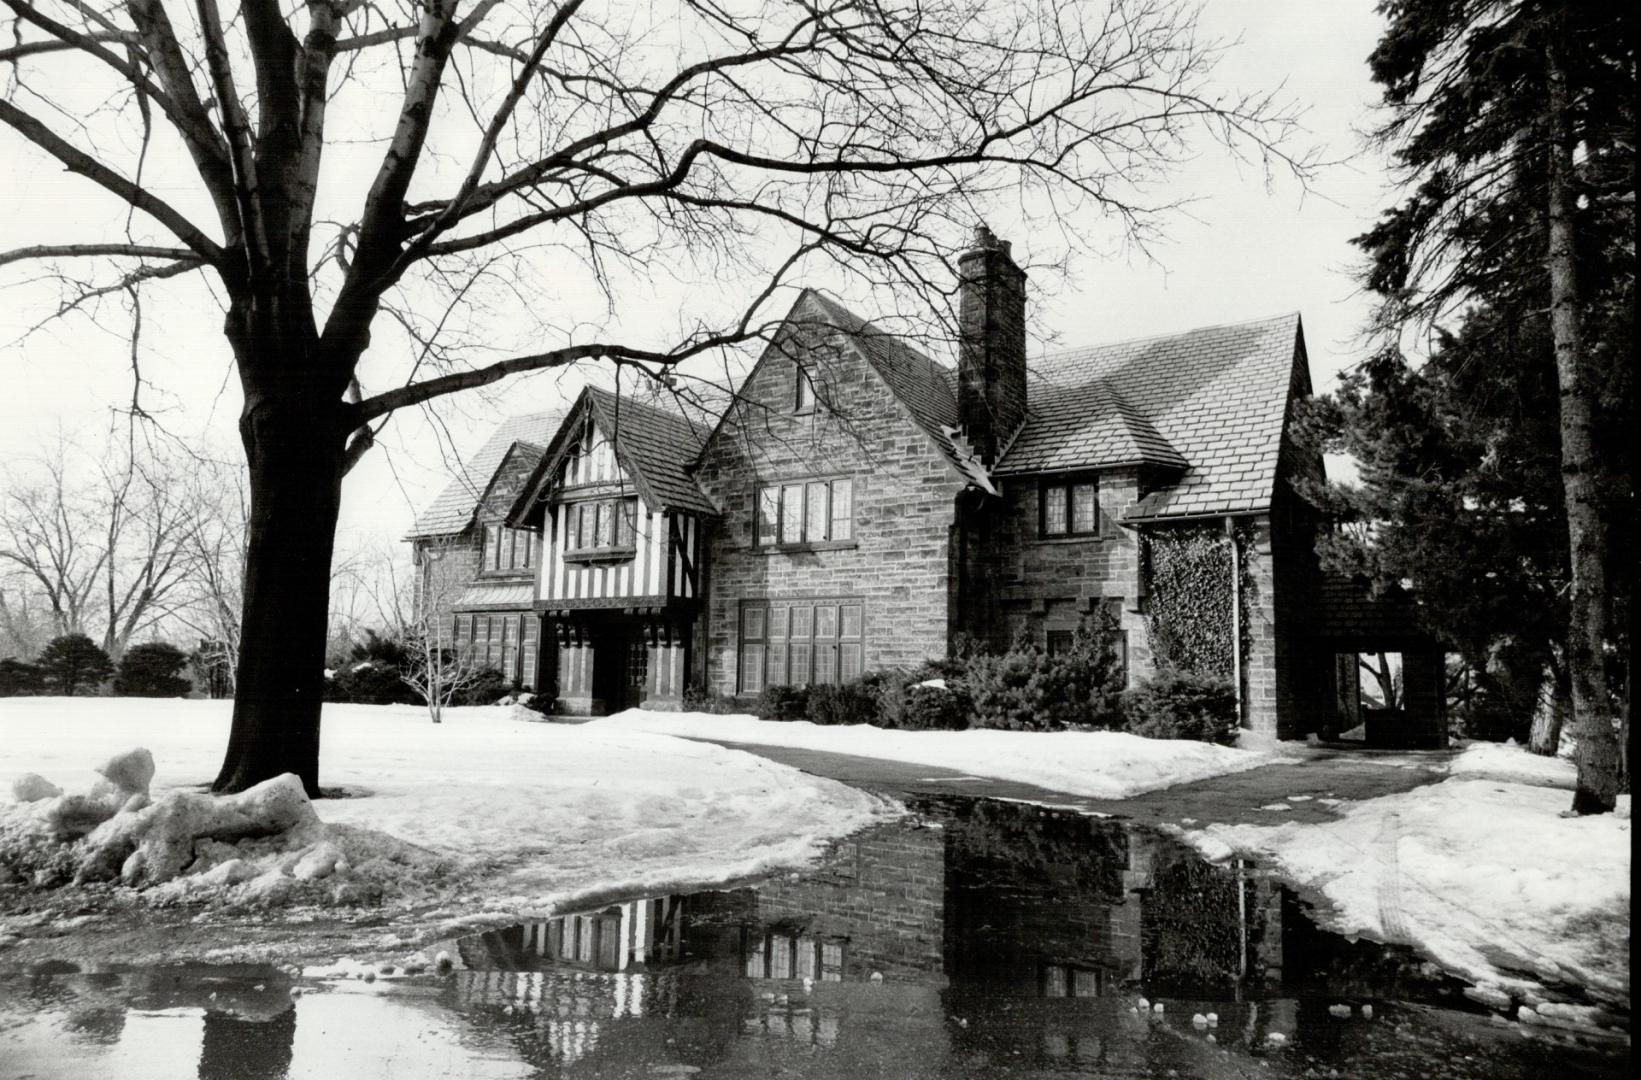 The Eaton mansion at 2 Old Forest Hill Rd